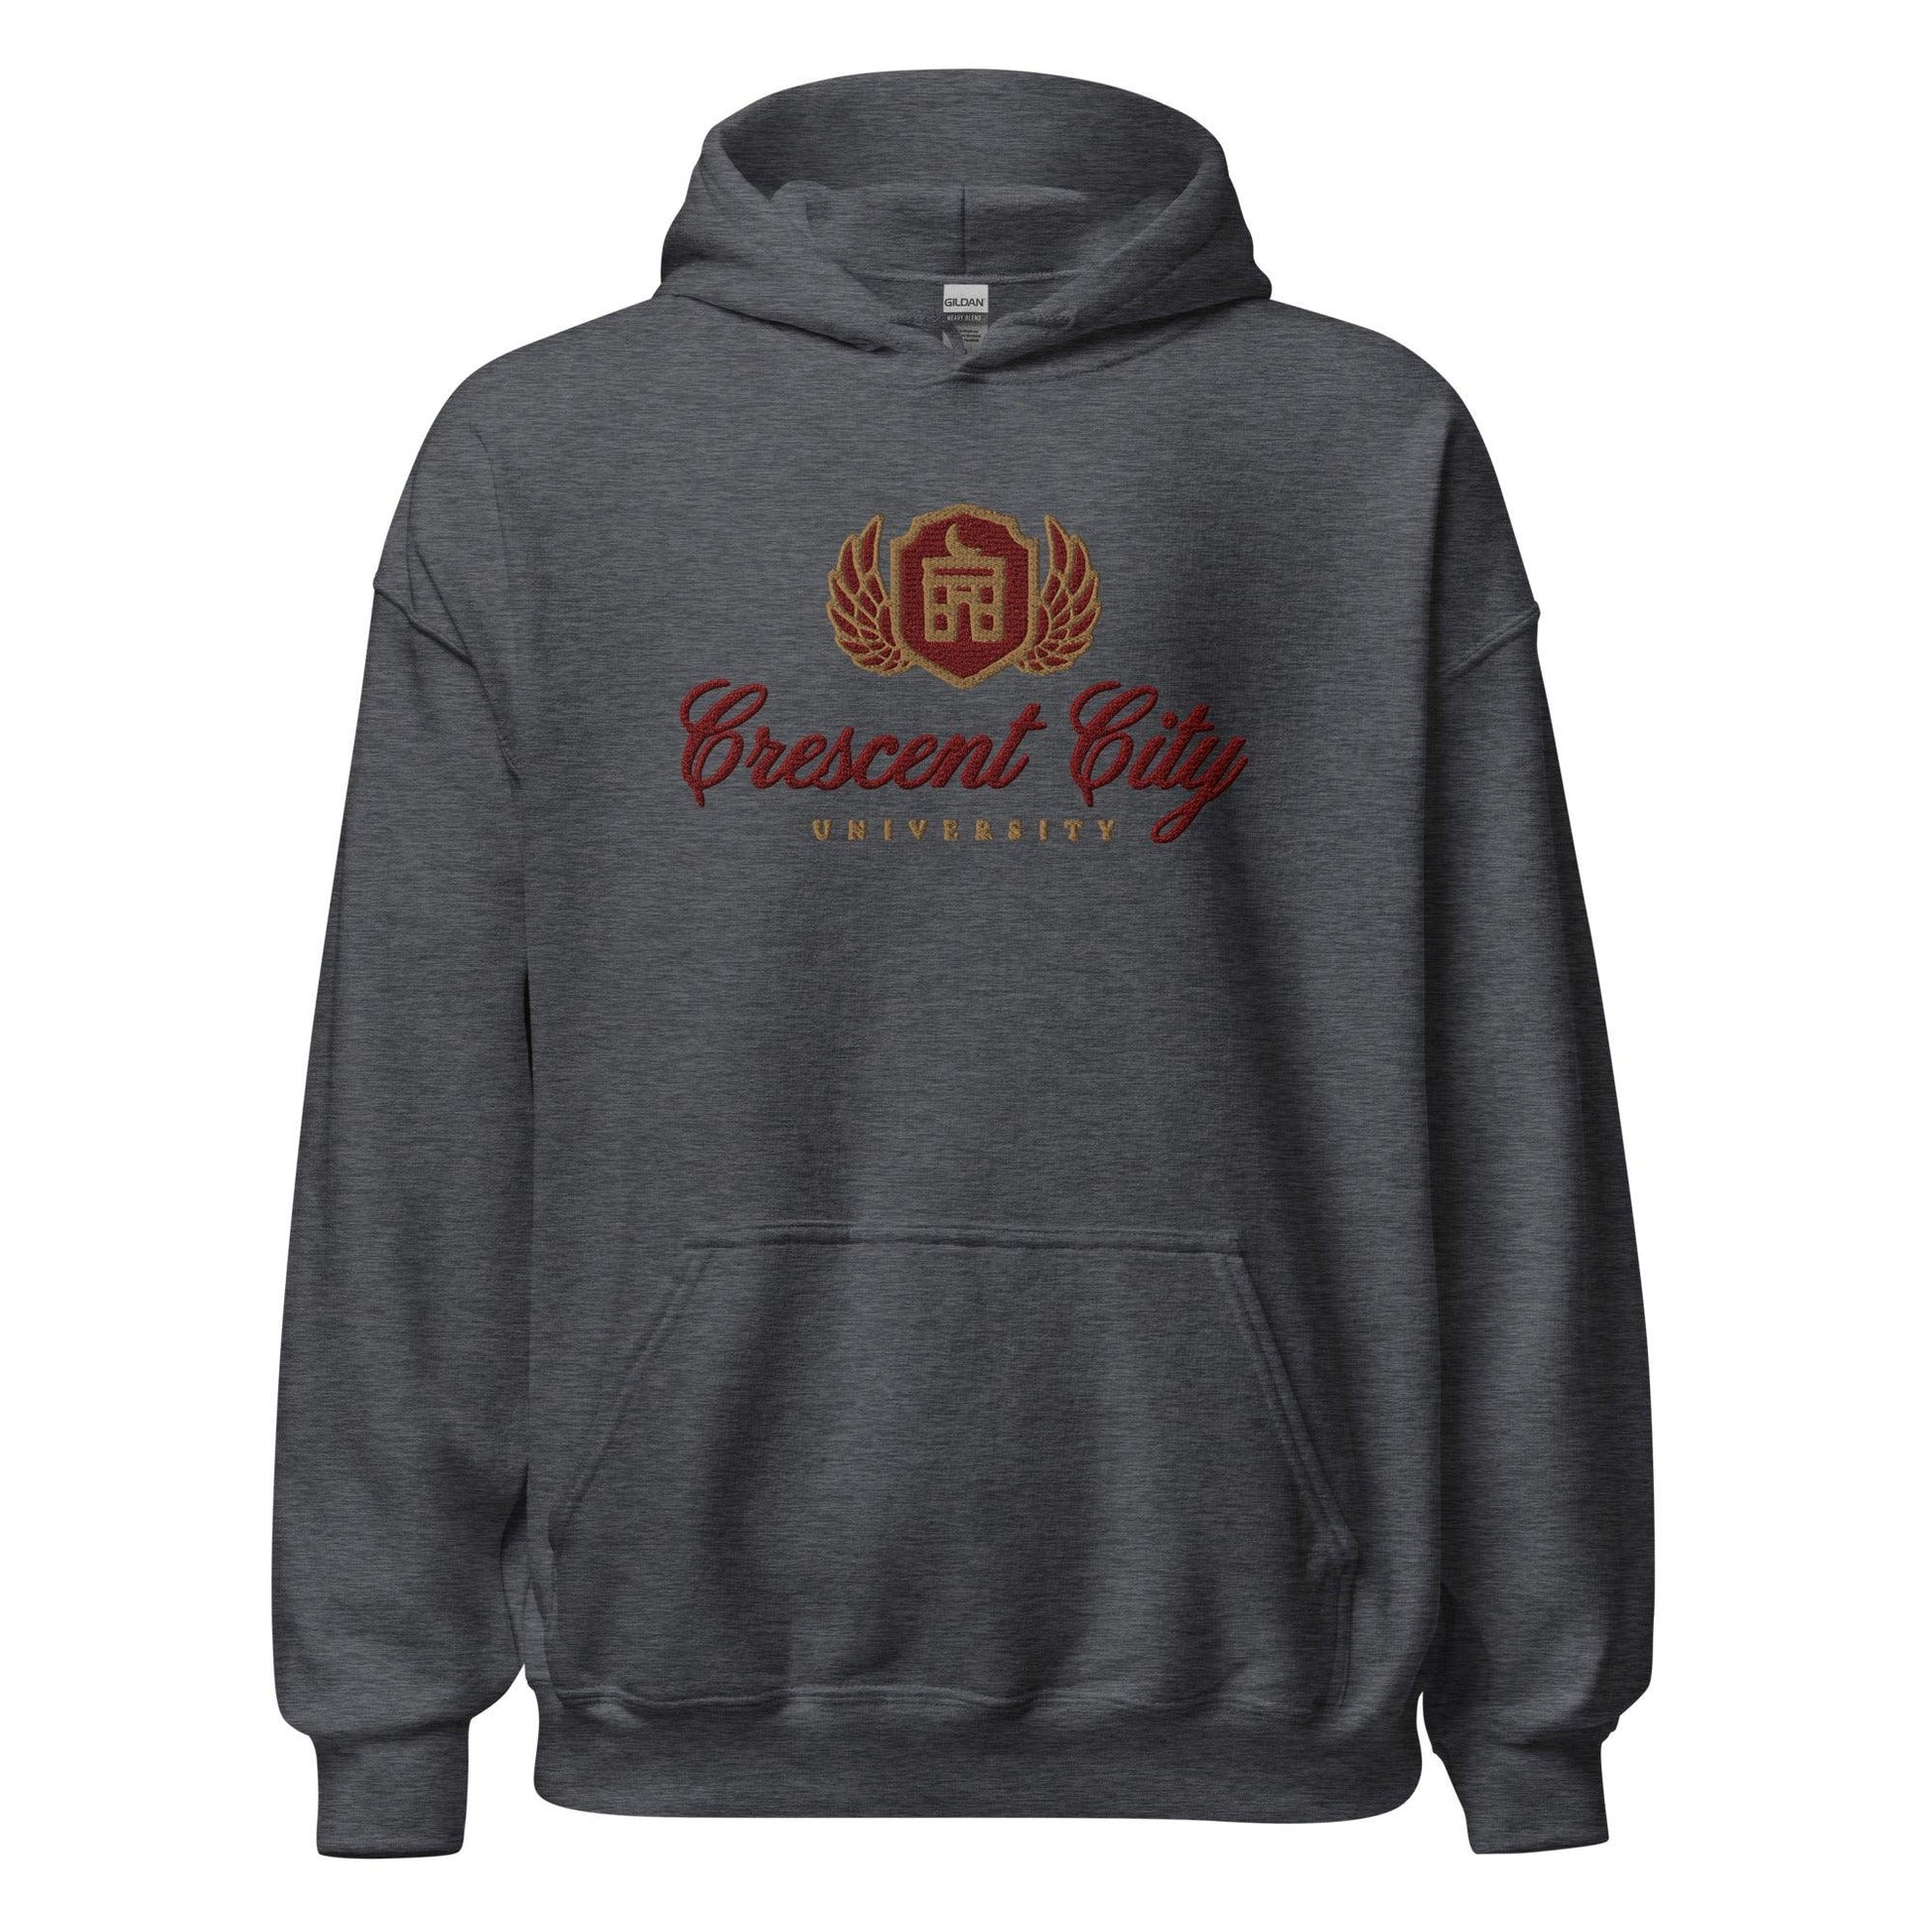 Crescent City University Embroidered Hoodie - The Bean Workshop - bryce quinlan, crescent city, danika fendyr, embroidered, hoodie, sarah j. maas